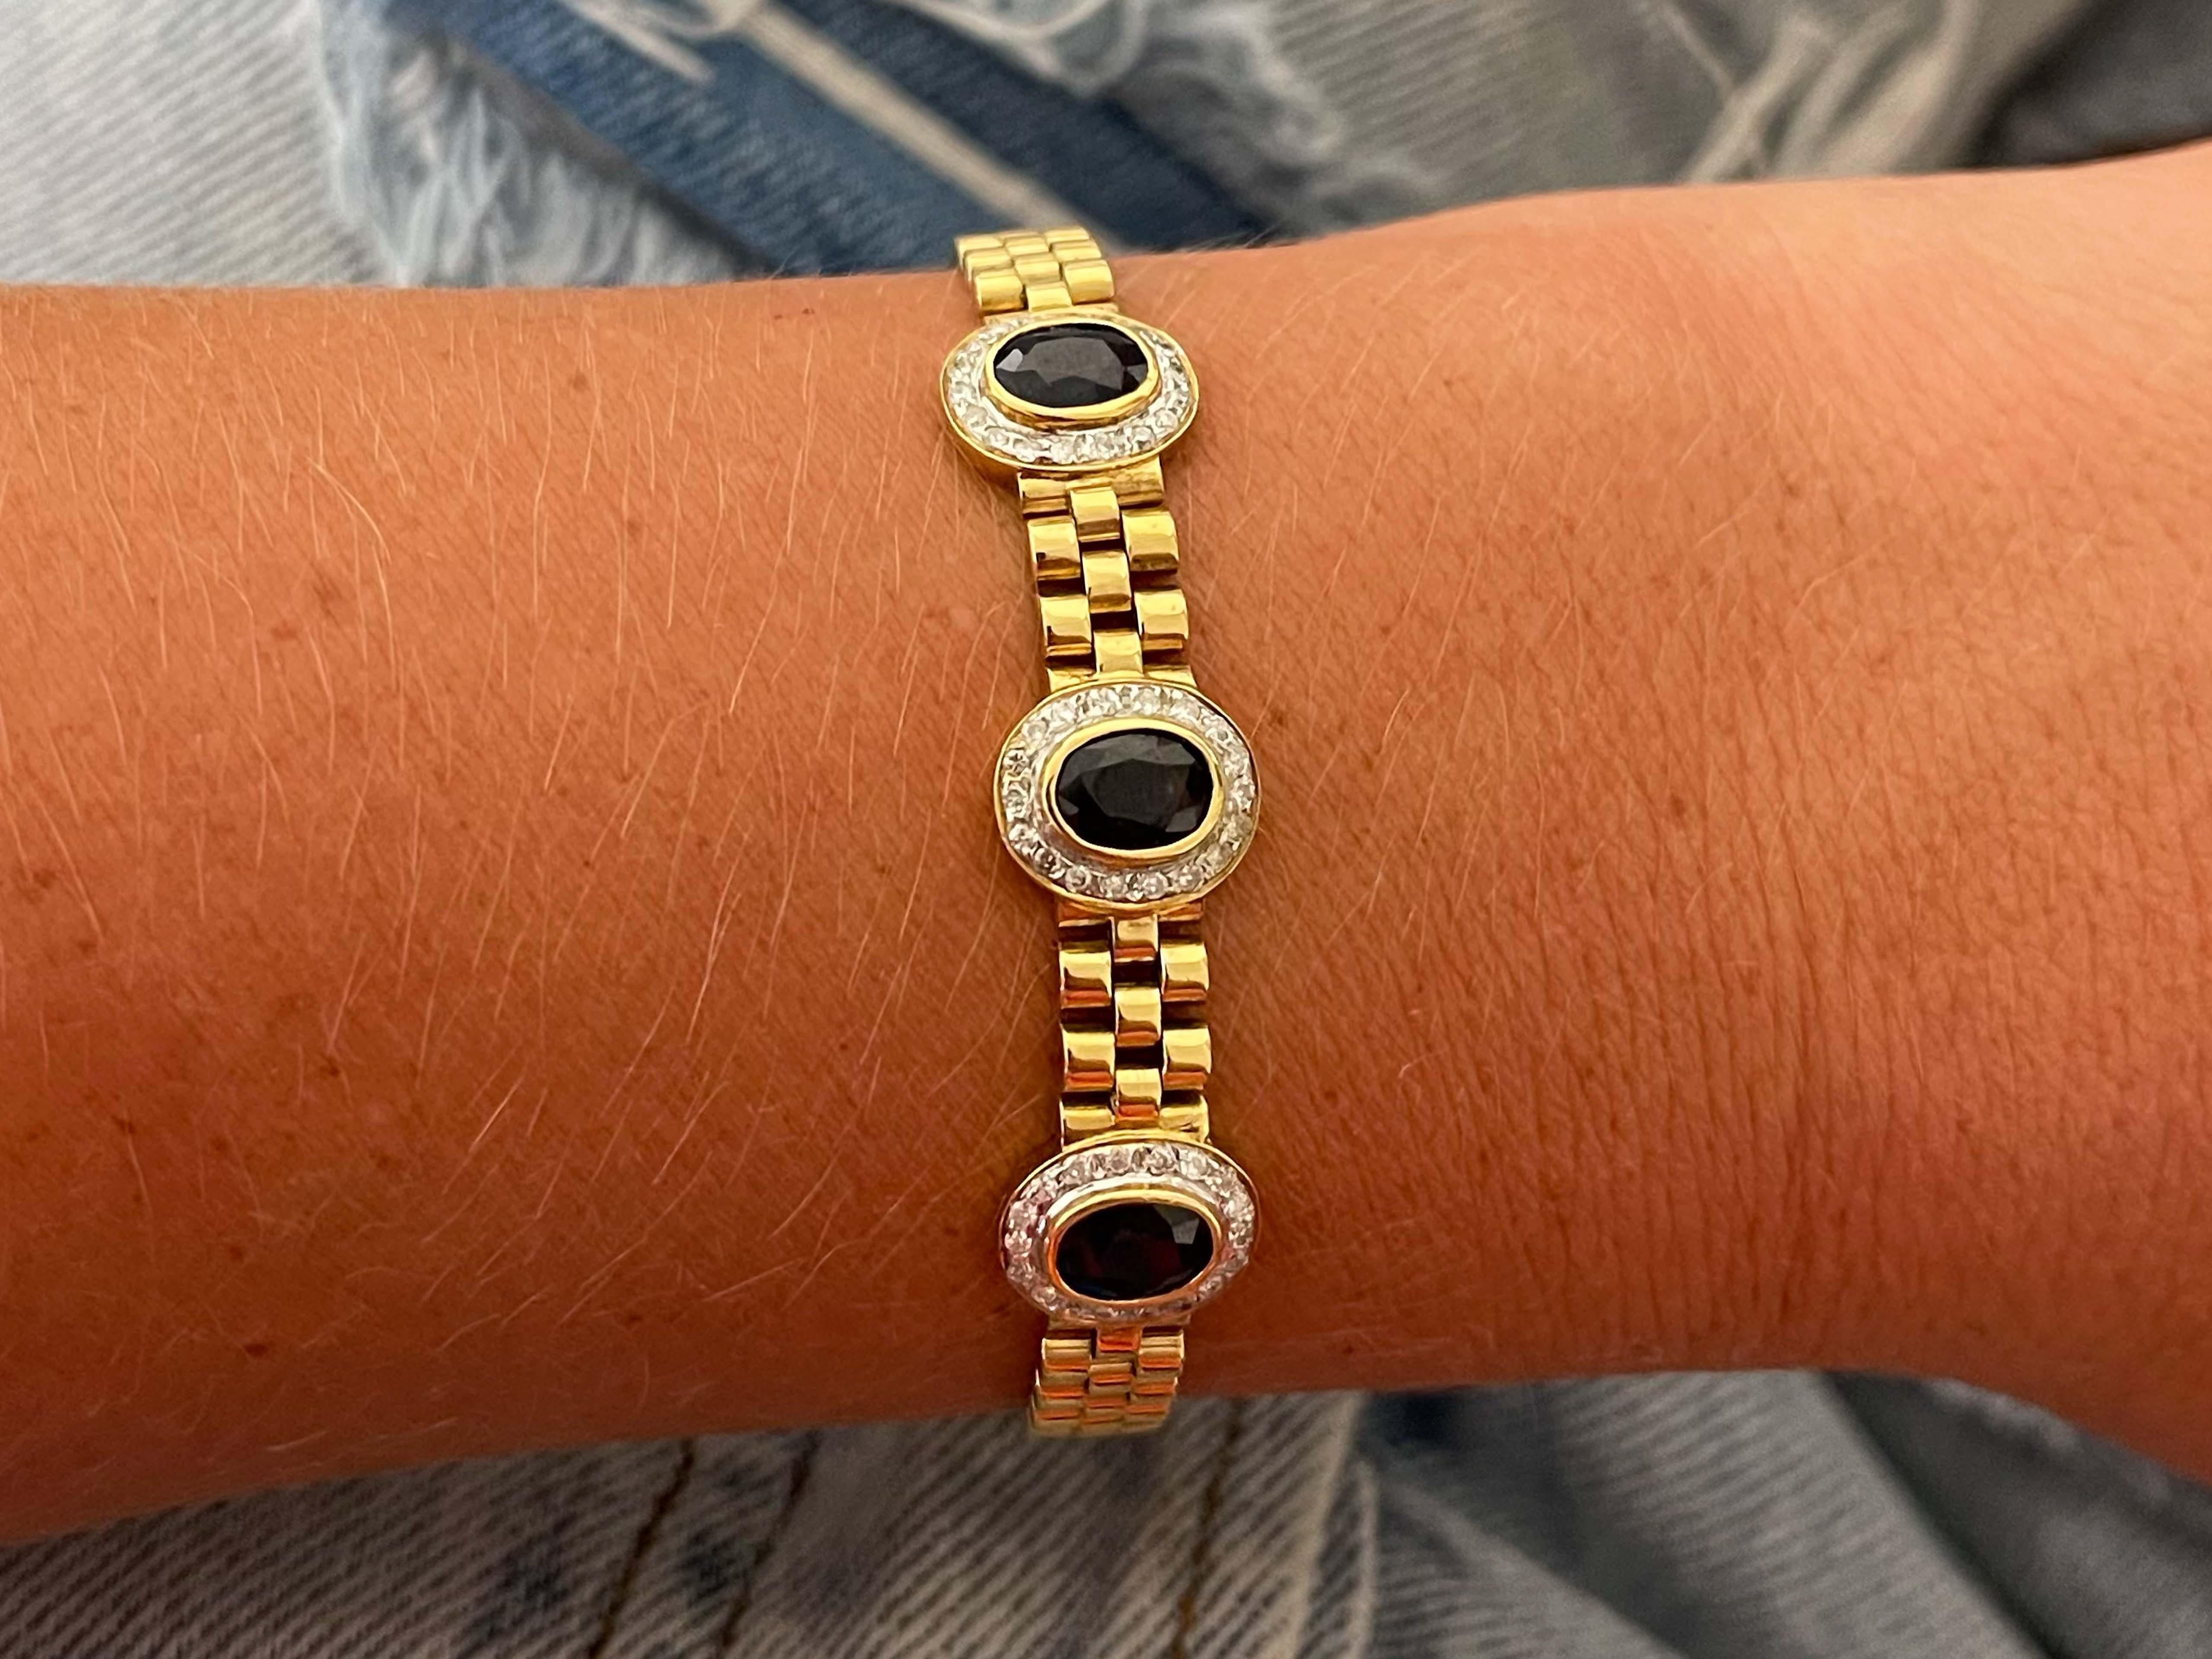 Bracelet Specifications:

Metal: 18k Yellow Gold

Sapphire Count: 3 Oval Sapphires

Sapphire Carat Weight: ~ 2.0 carats

Diamond Count: 54

Diamond Color: G

Diamond Clarity: VS-SI1

Diamond Carat Weight: 0.50

Bracelet Length: ~7 inches

Bracelet